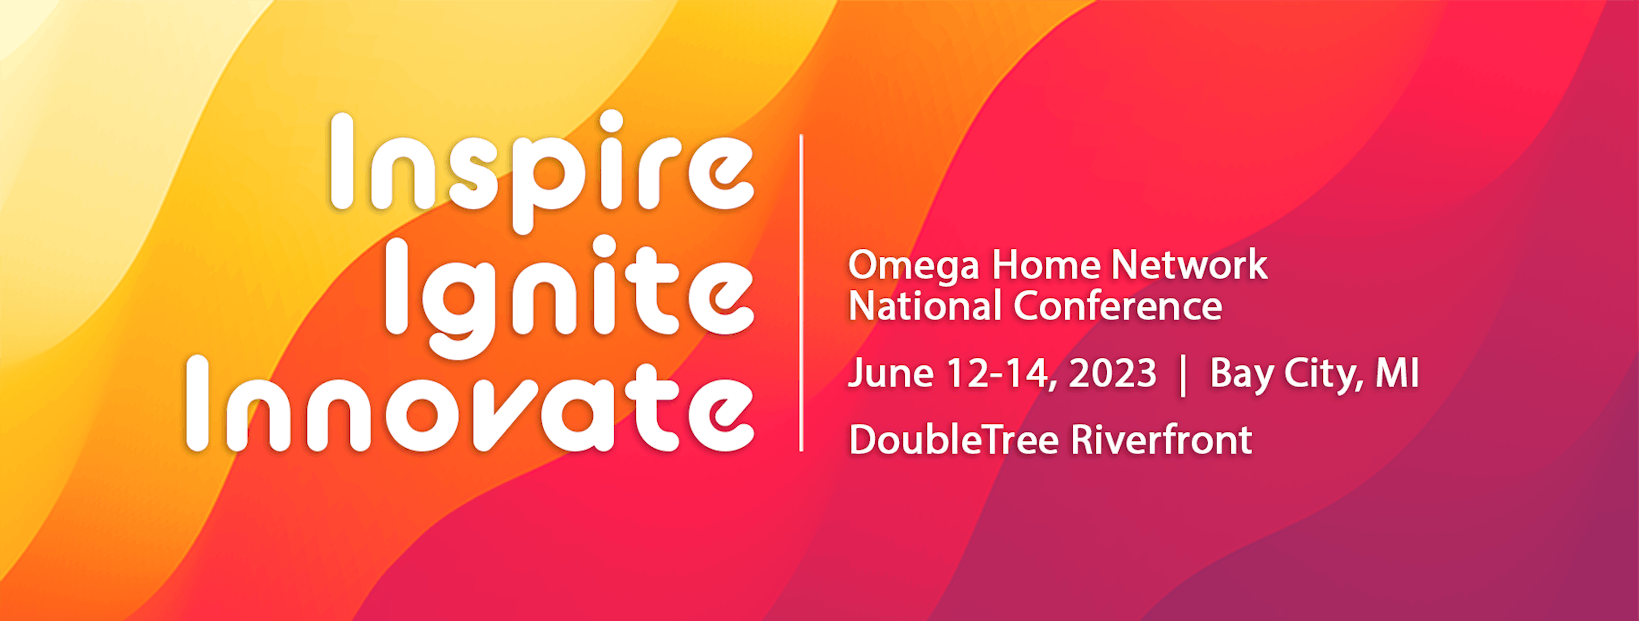 2023 Omega Home Network National Conference